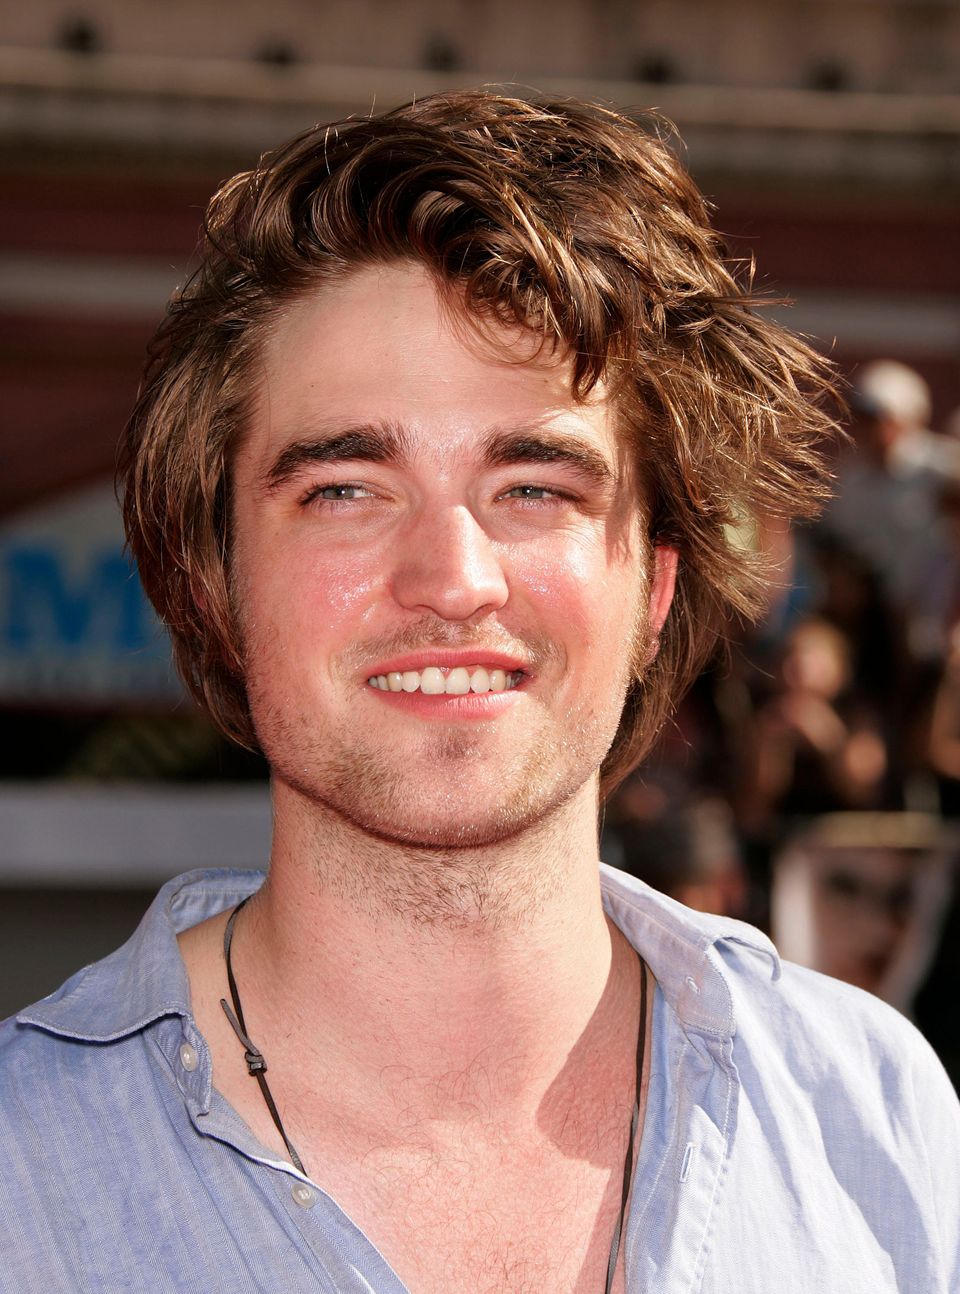 Robert Pattinson Has New Hair In 'The King' And Fans Are Freaking Out |  HuffPost Entertainment